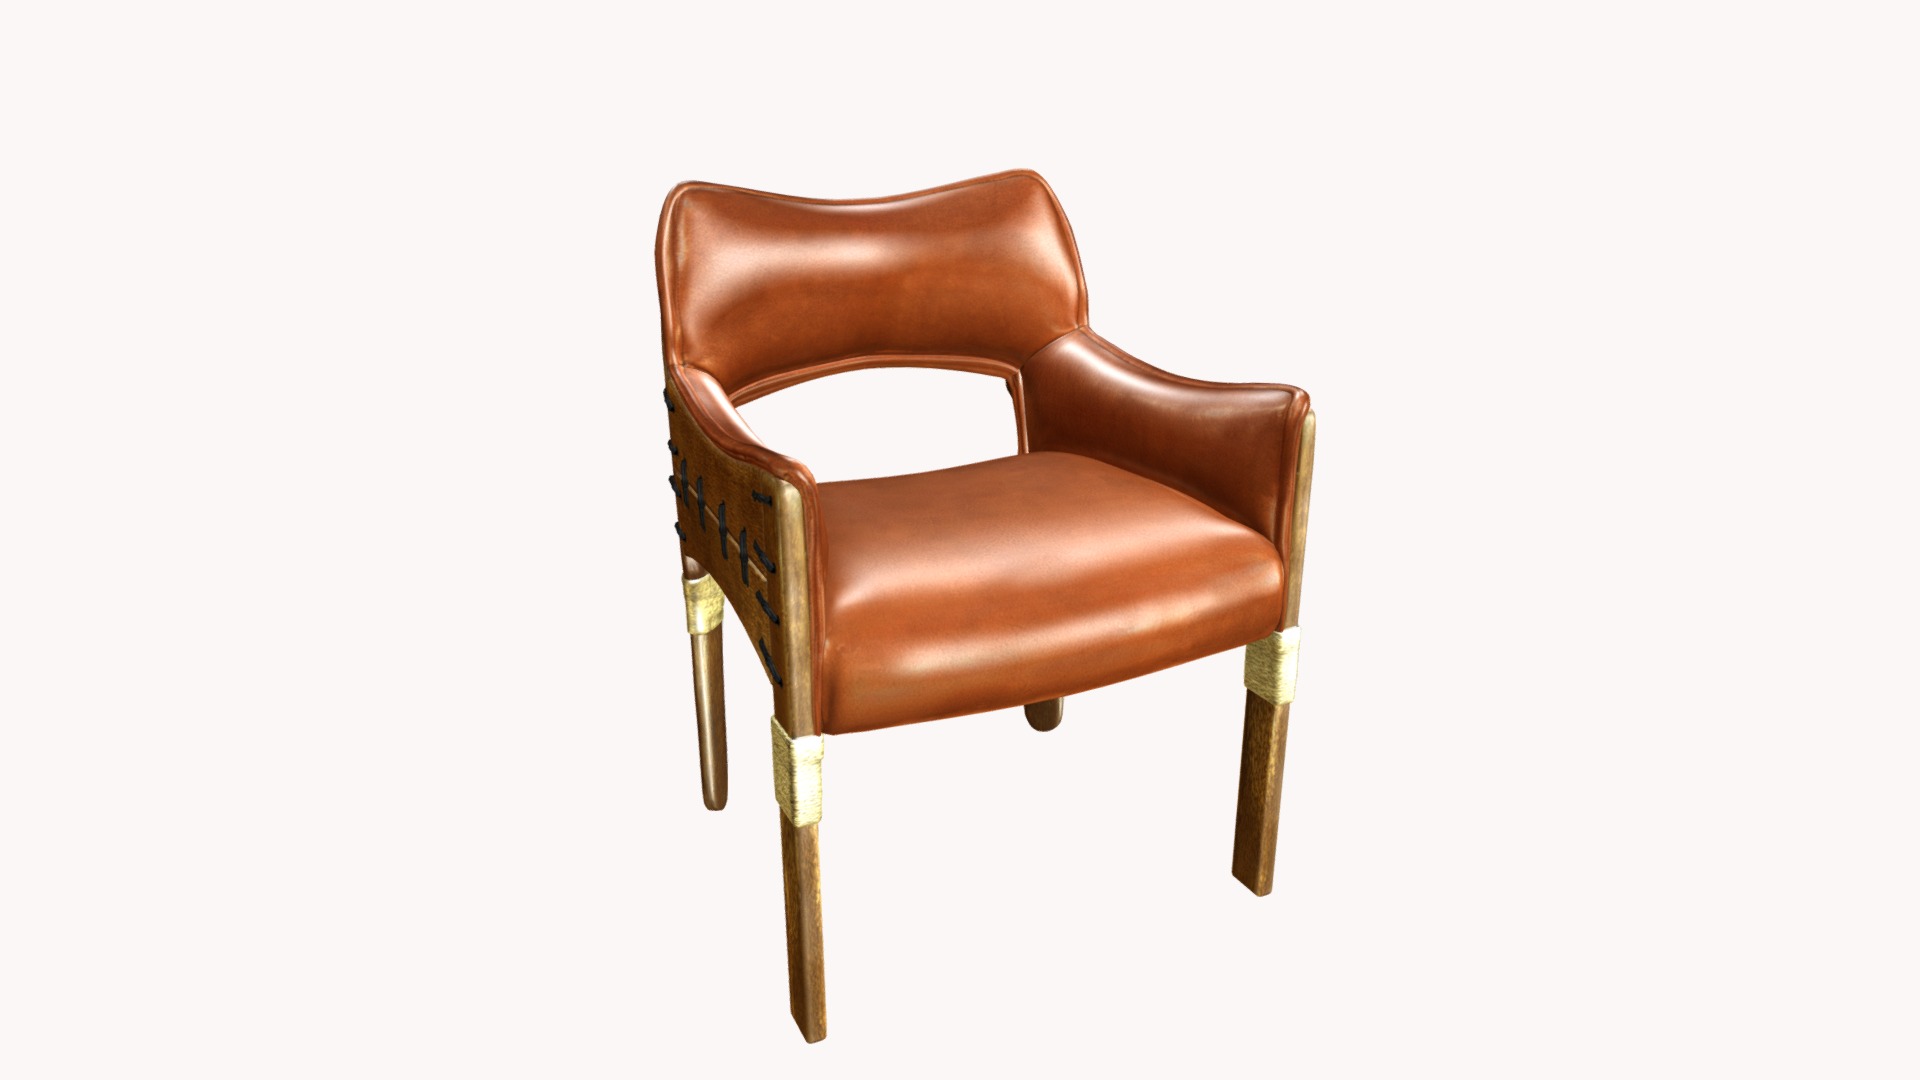 3D model Dining Chair - This is a 3D model of the Dining Chair. The 3D model is about a brown leather chair.